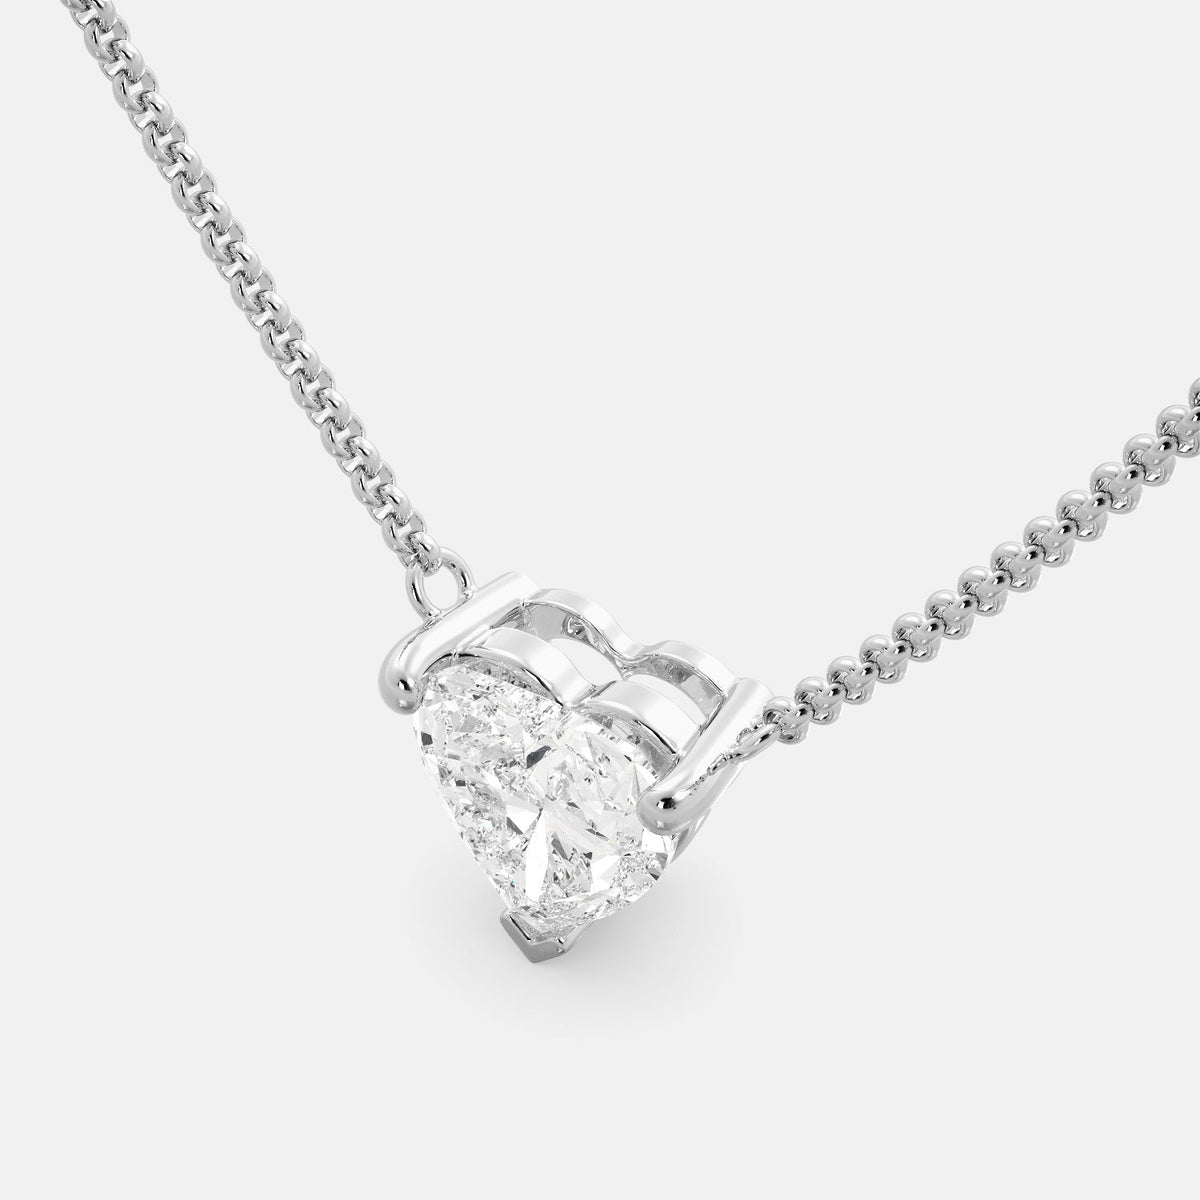 A close-up of a heart-shaped diamond necklace in recycled white gold. The necklace is set with a single heart-shaped diamond in the center of a pendant. The necklace is made of recycled white gold and has a simple, elegant design. The diamond is sparkling and reflects light beautifully. The necklace is a perfect gift for a loved one or a special occasion.